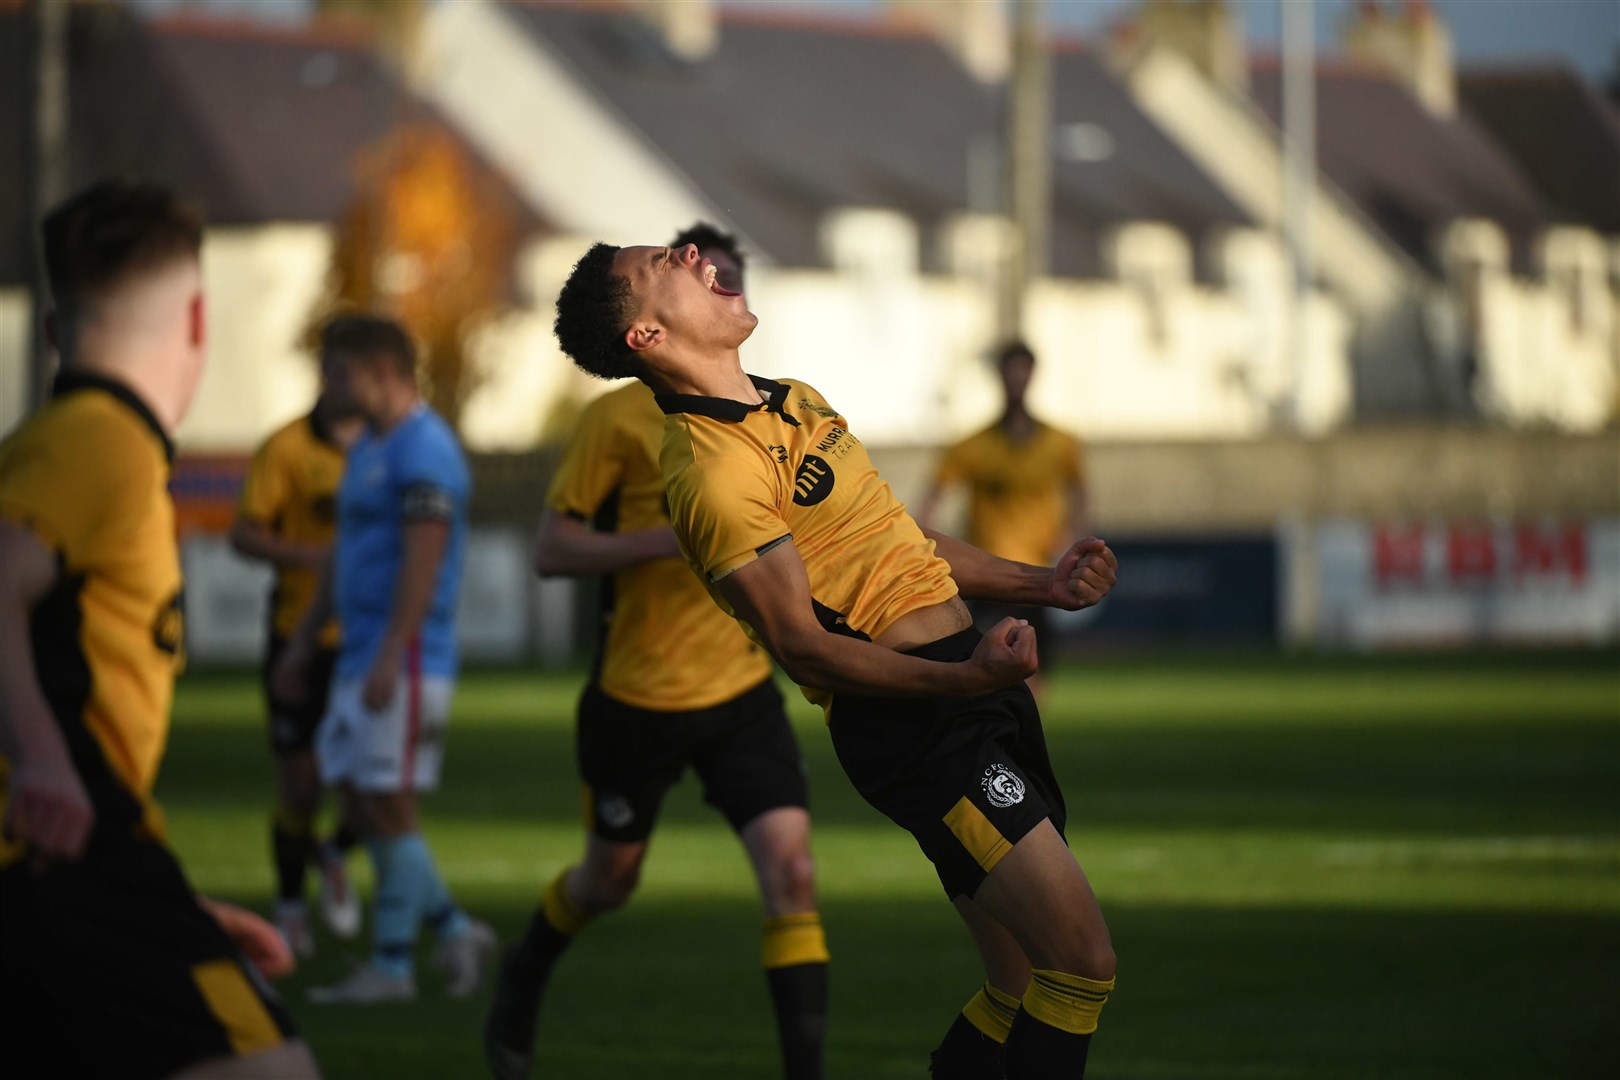 George Robesten celebrates scoring his first goal for Nairn County. Picture: James Mackenzie